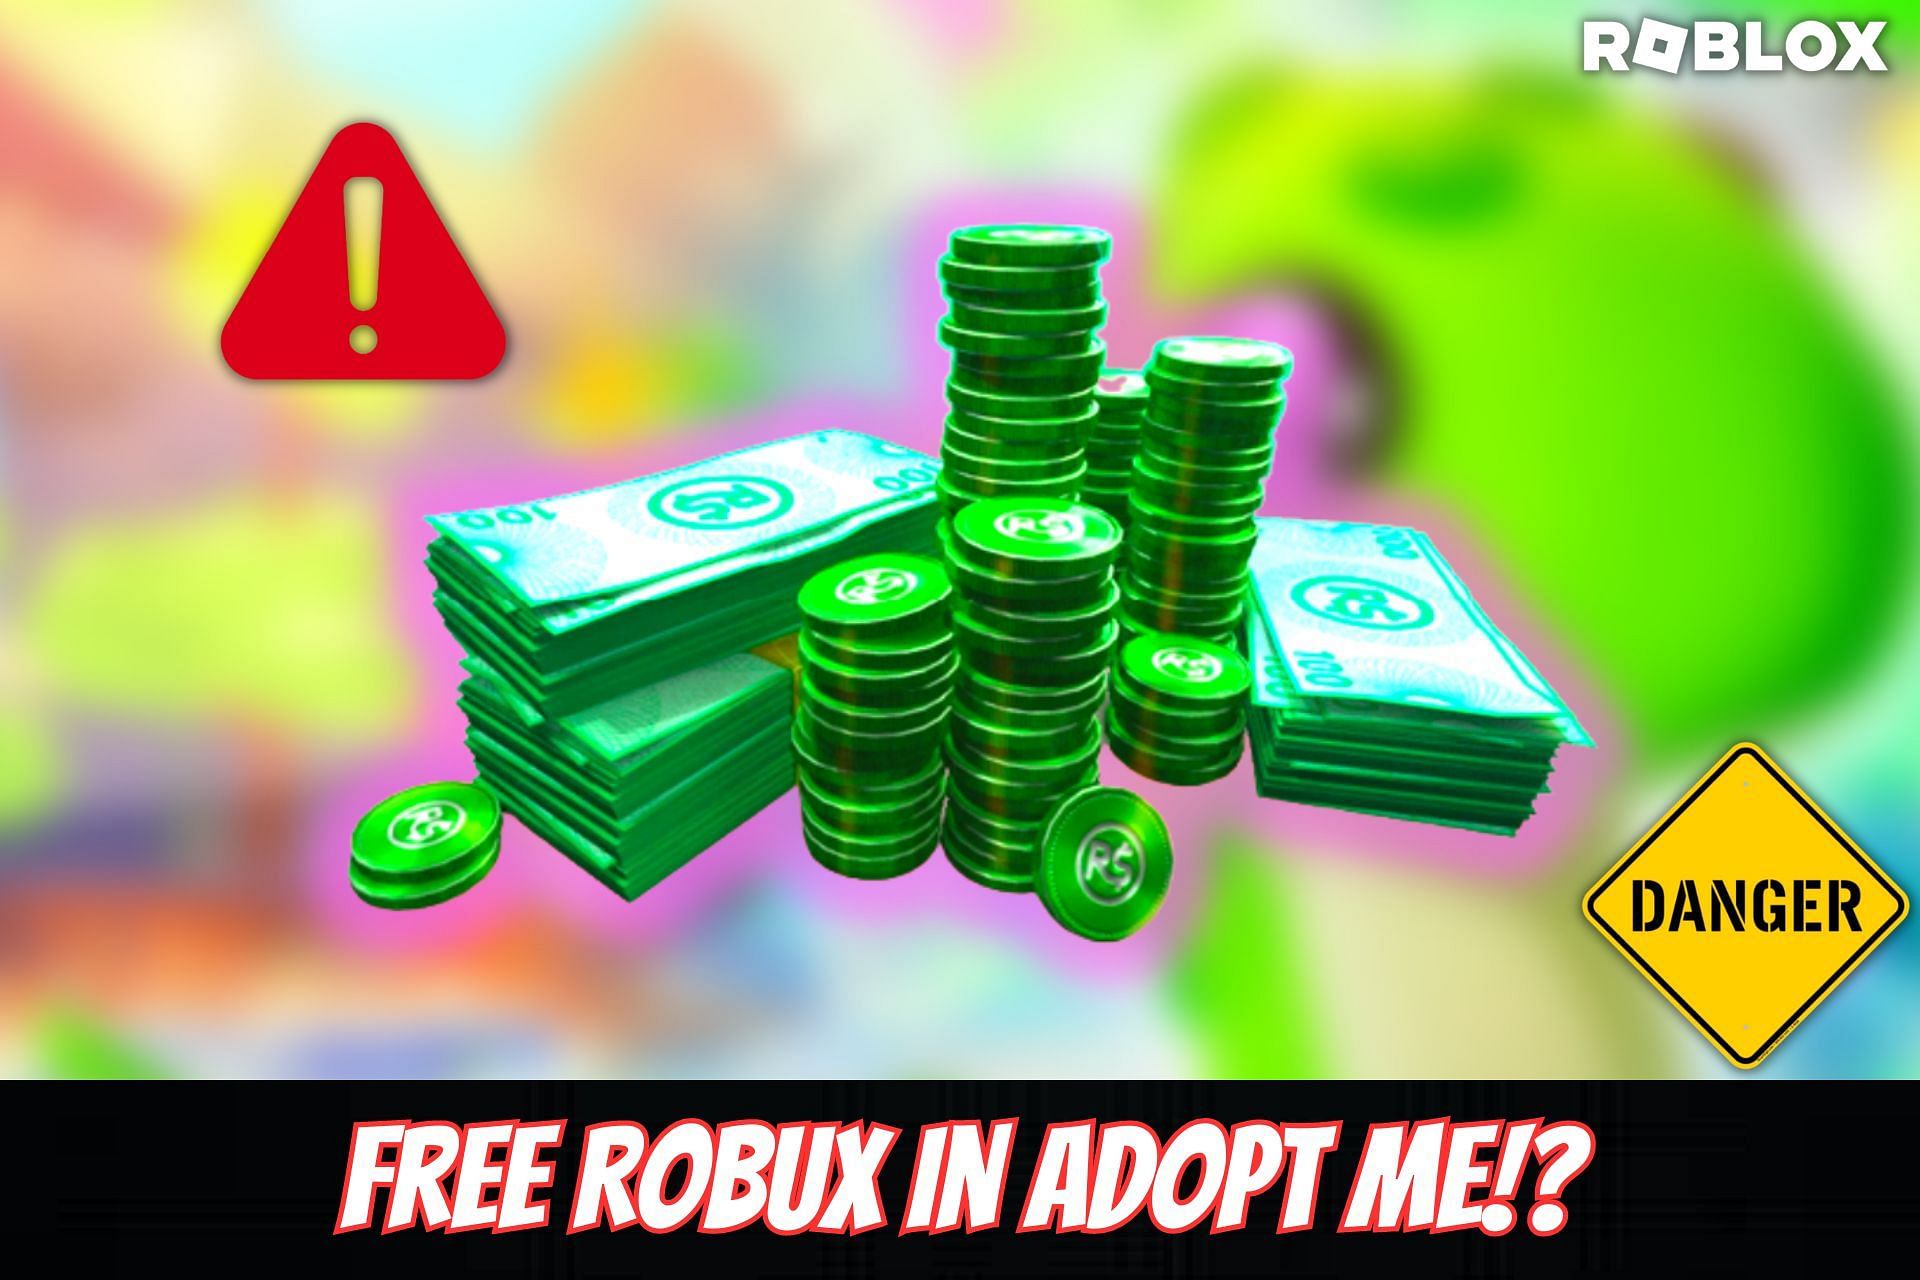 free Robux in Roblox Adopt Me?